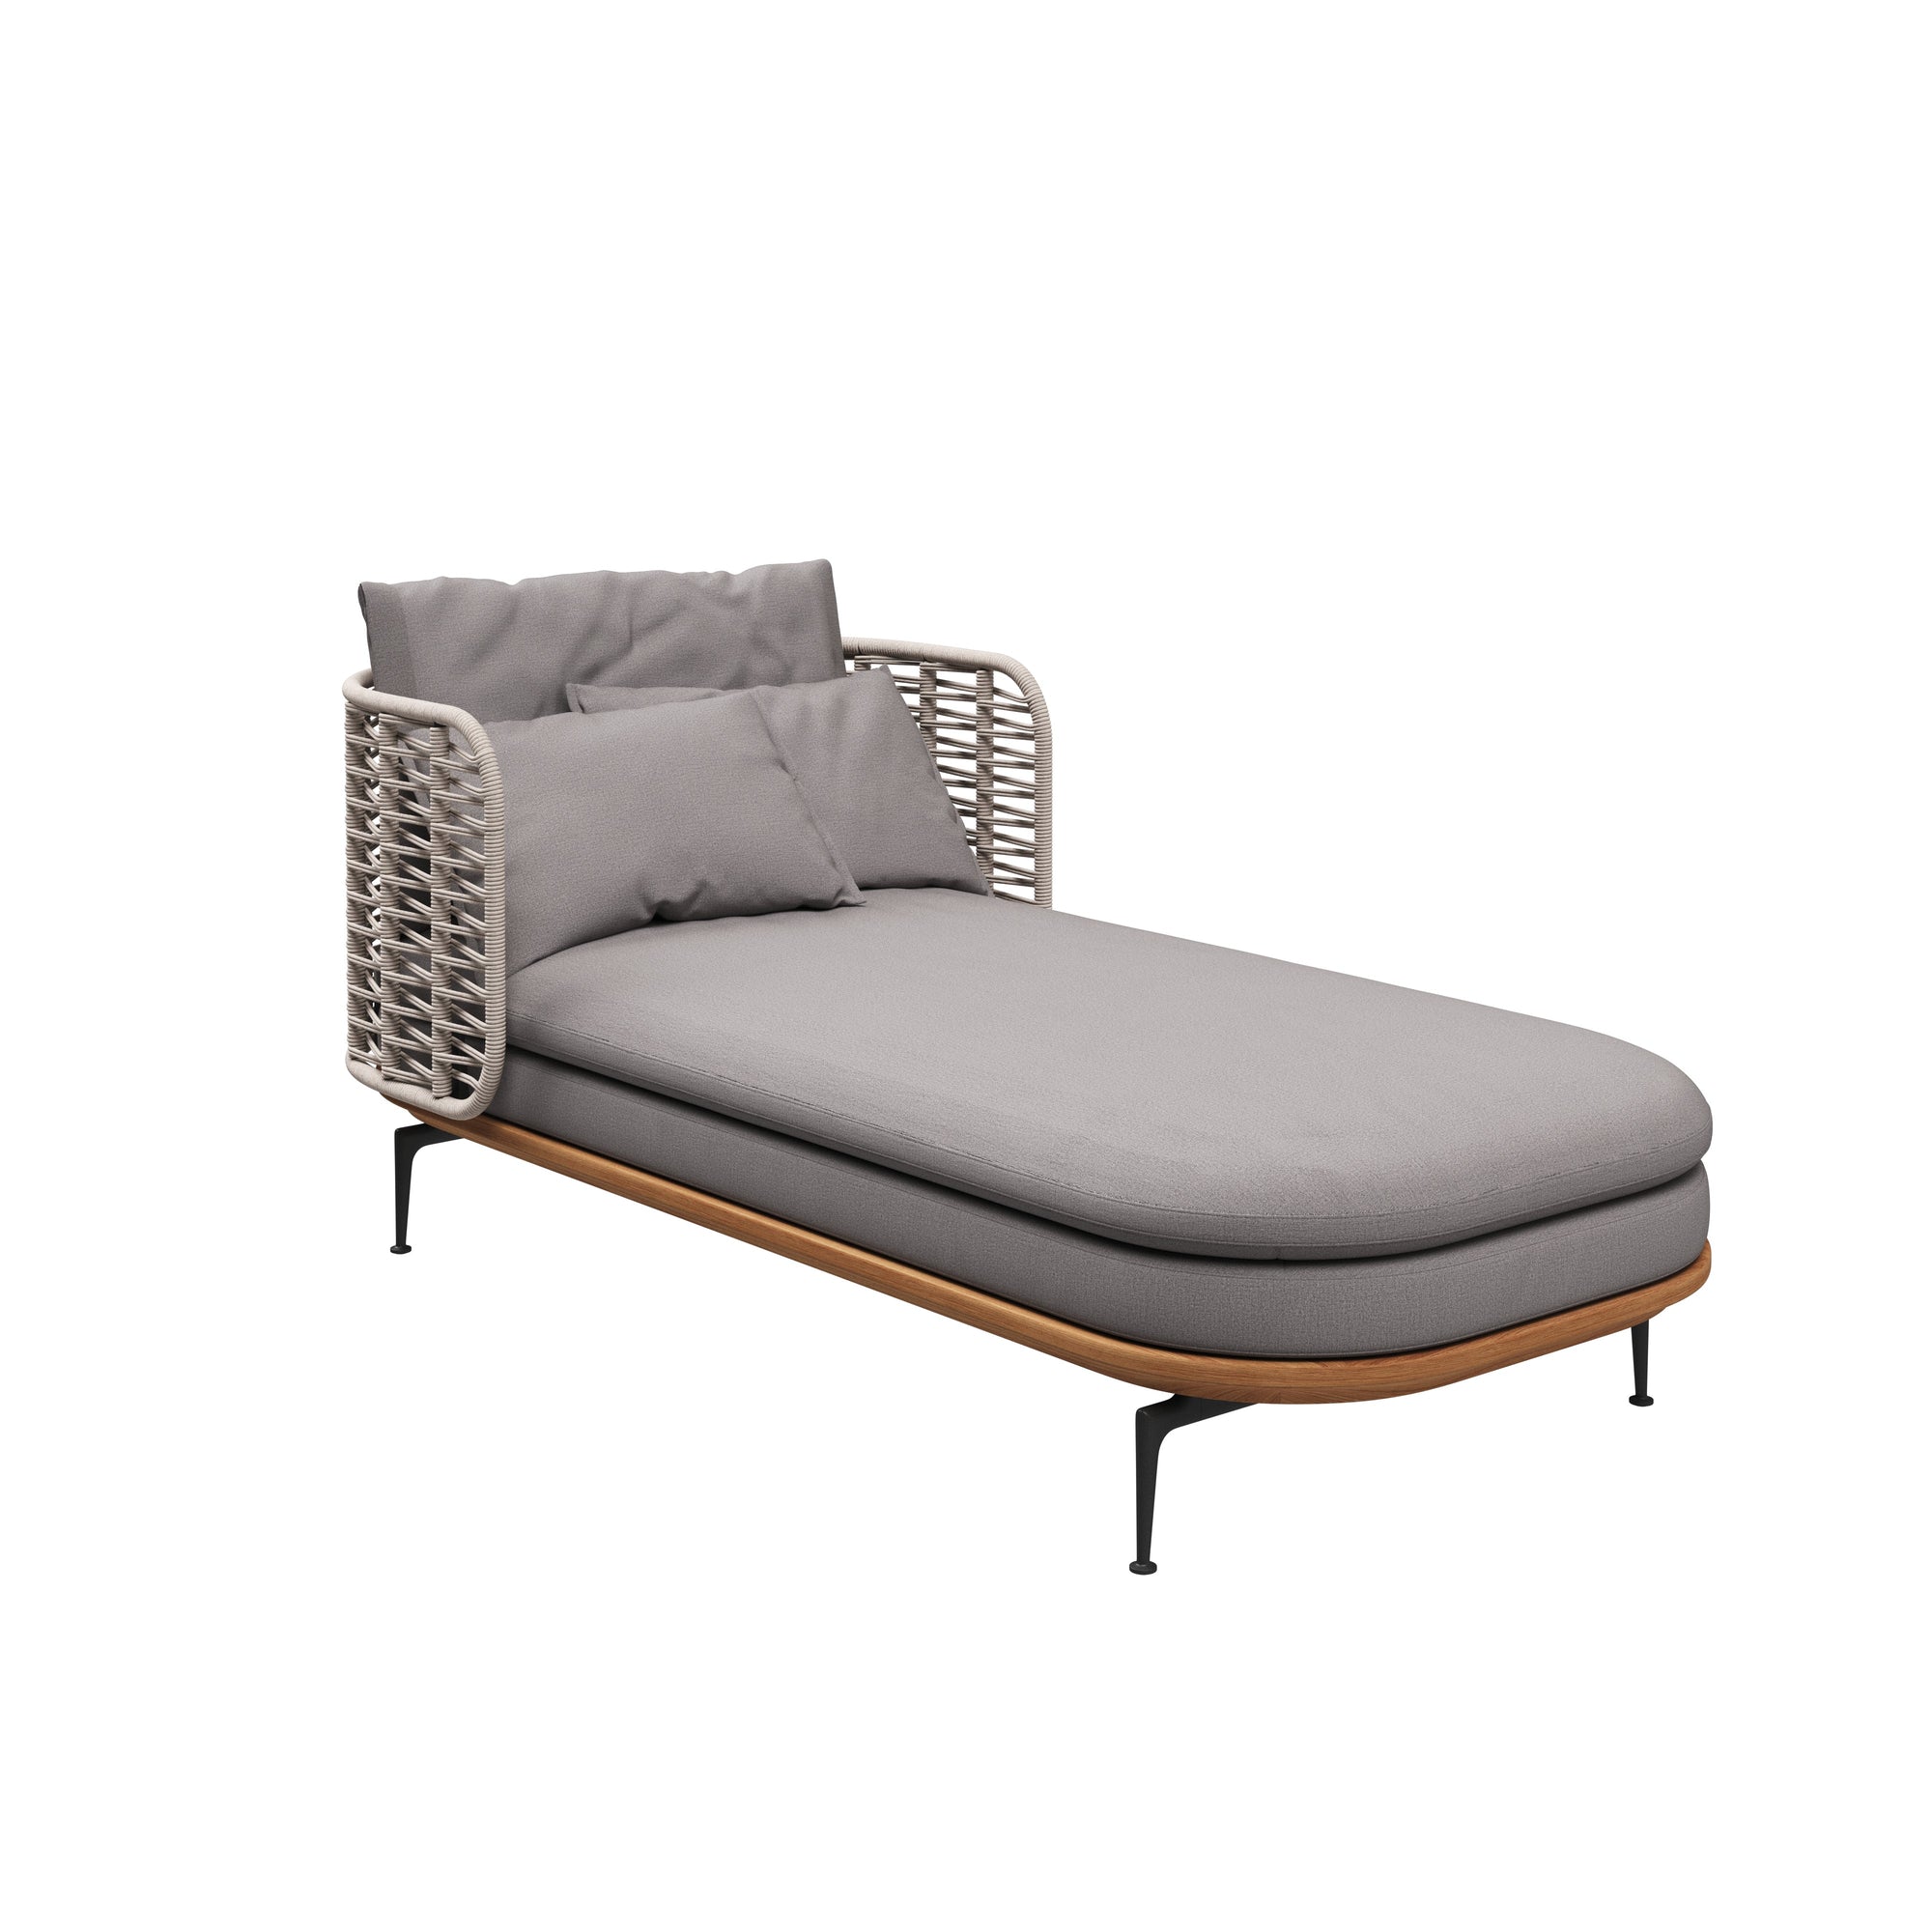 Mistral Daybed-Gloster-Contract Furniture Store